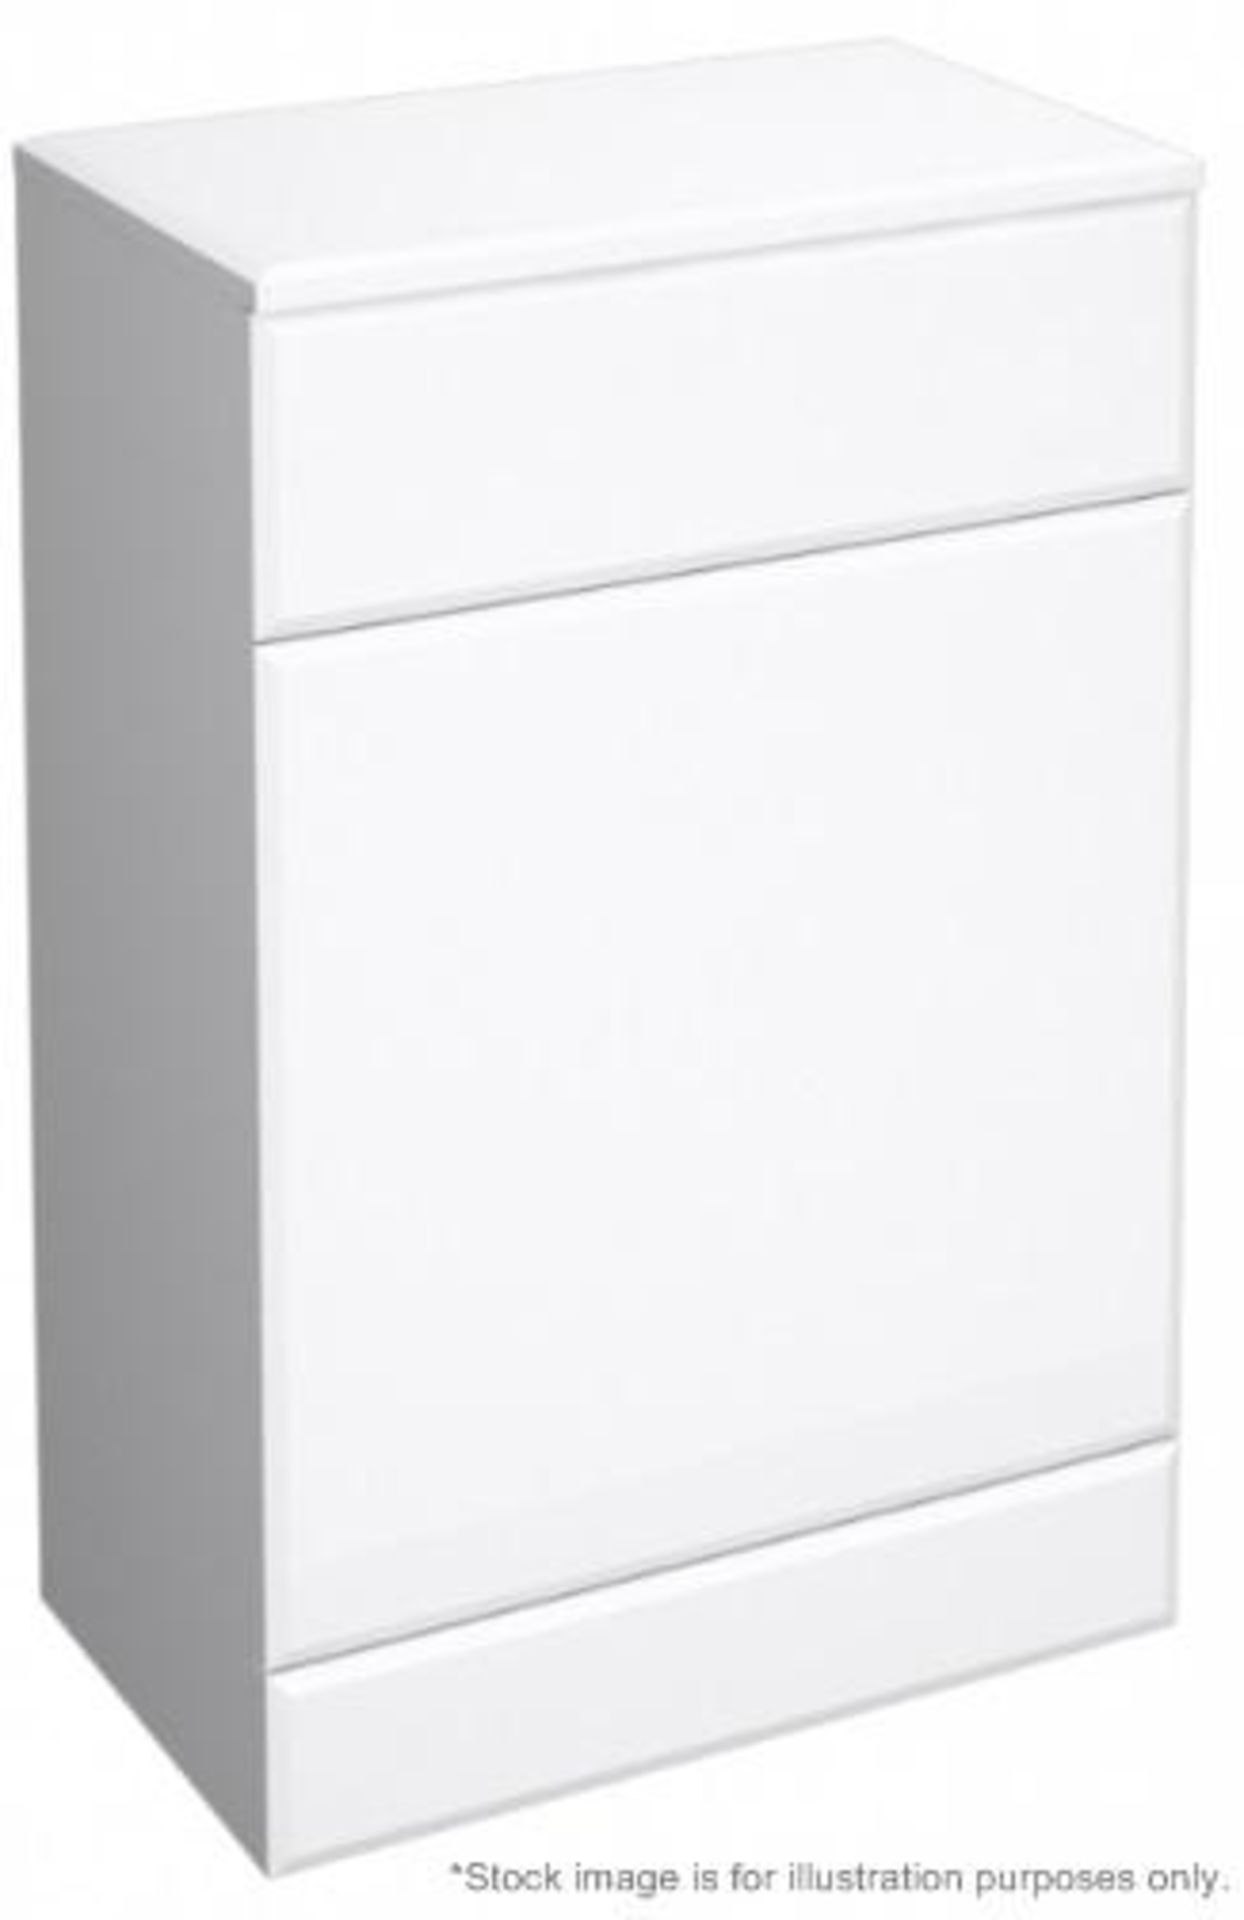 1 x Slimline Back To Wall Unit In White Including Concealed Cistern - Dimensions: 500x300mm - New & - Image 2 of 3